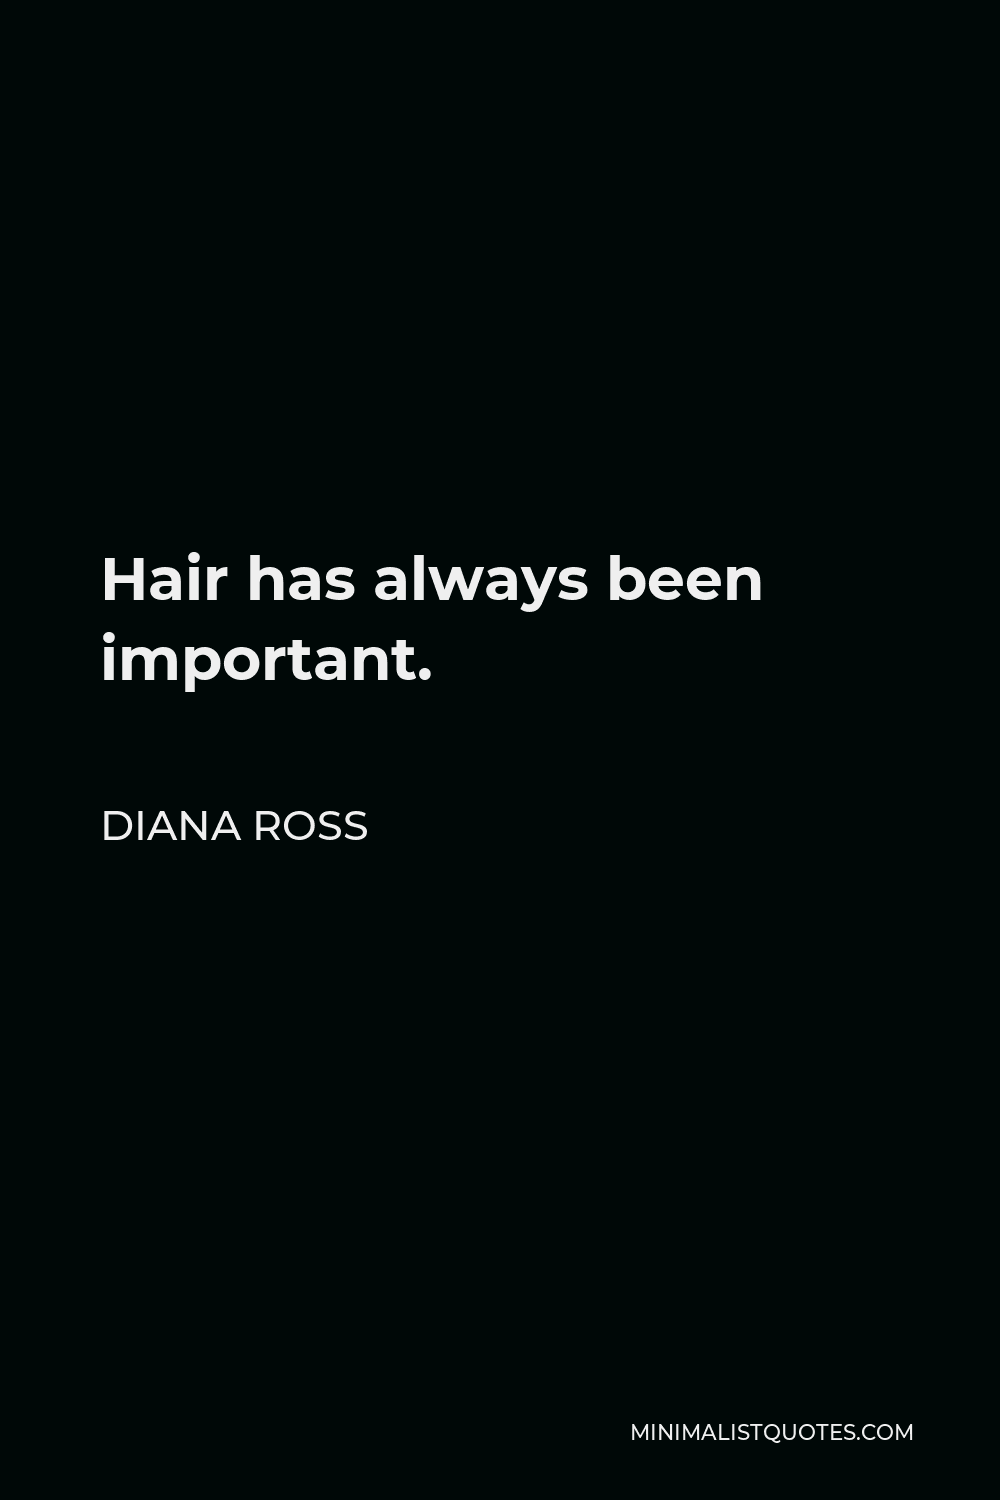 Diana Ross Quote - Hair has always been important.